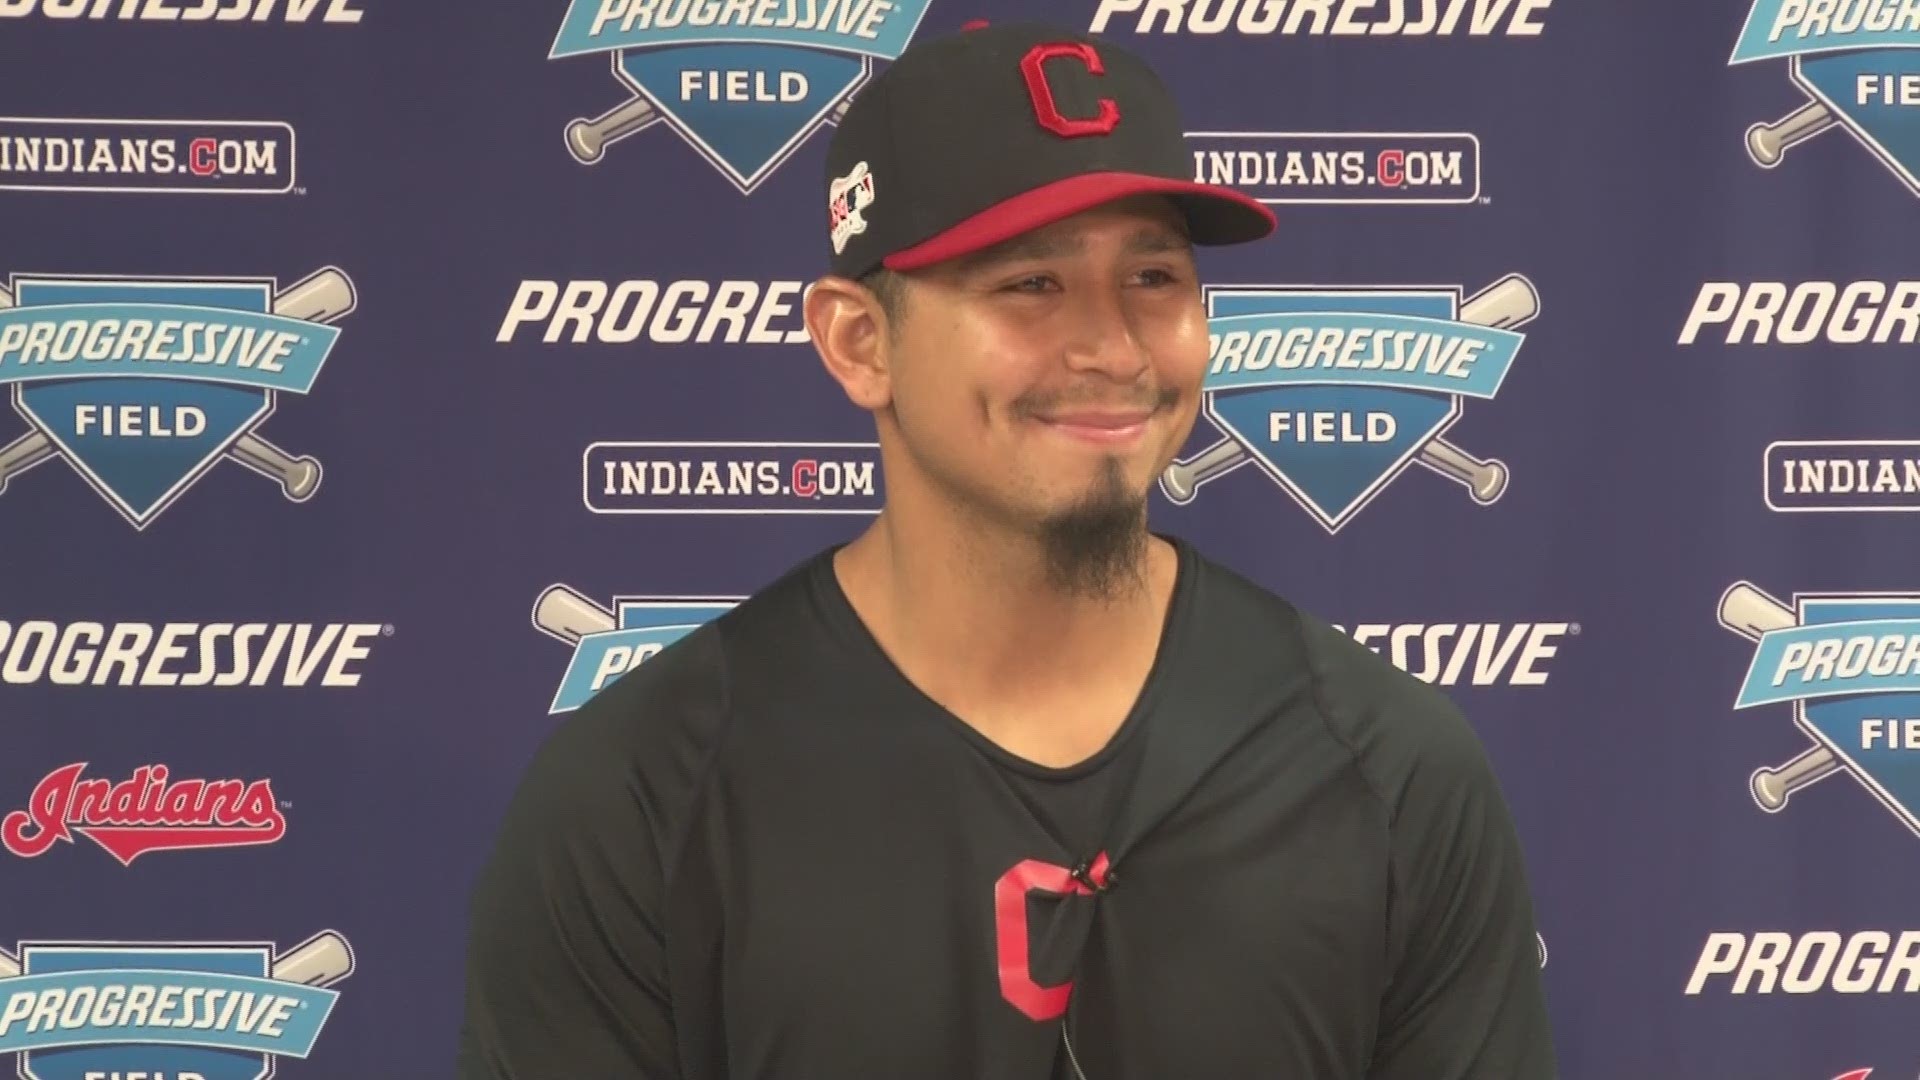 Carlos Carrasco met with members of the media on Thursday at Progressive Field.